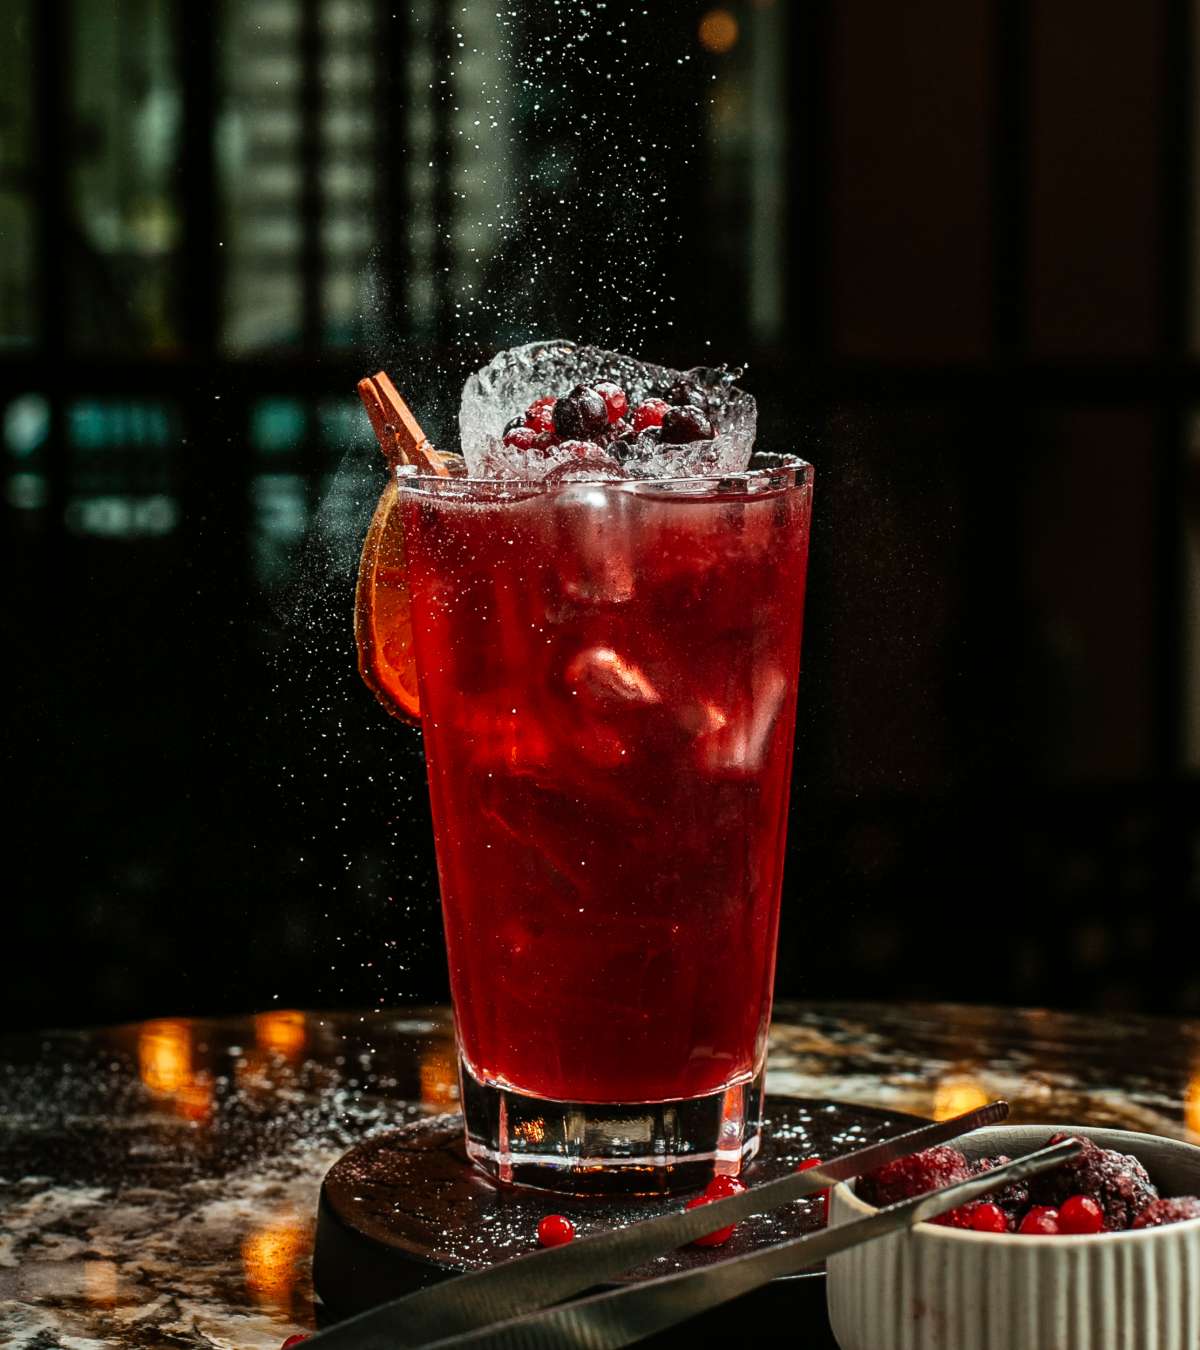 New Year, new culinary adventures with sparkling pomegranate punch